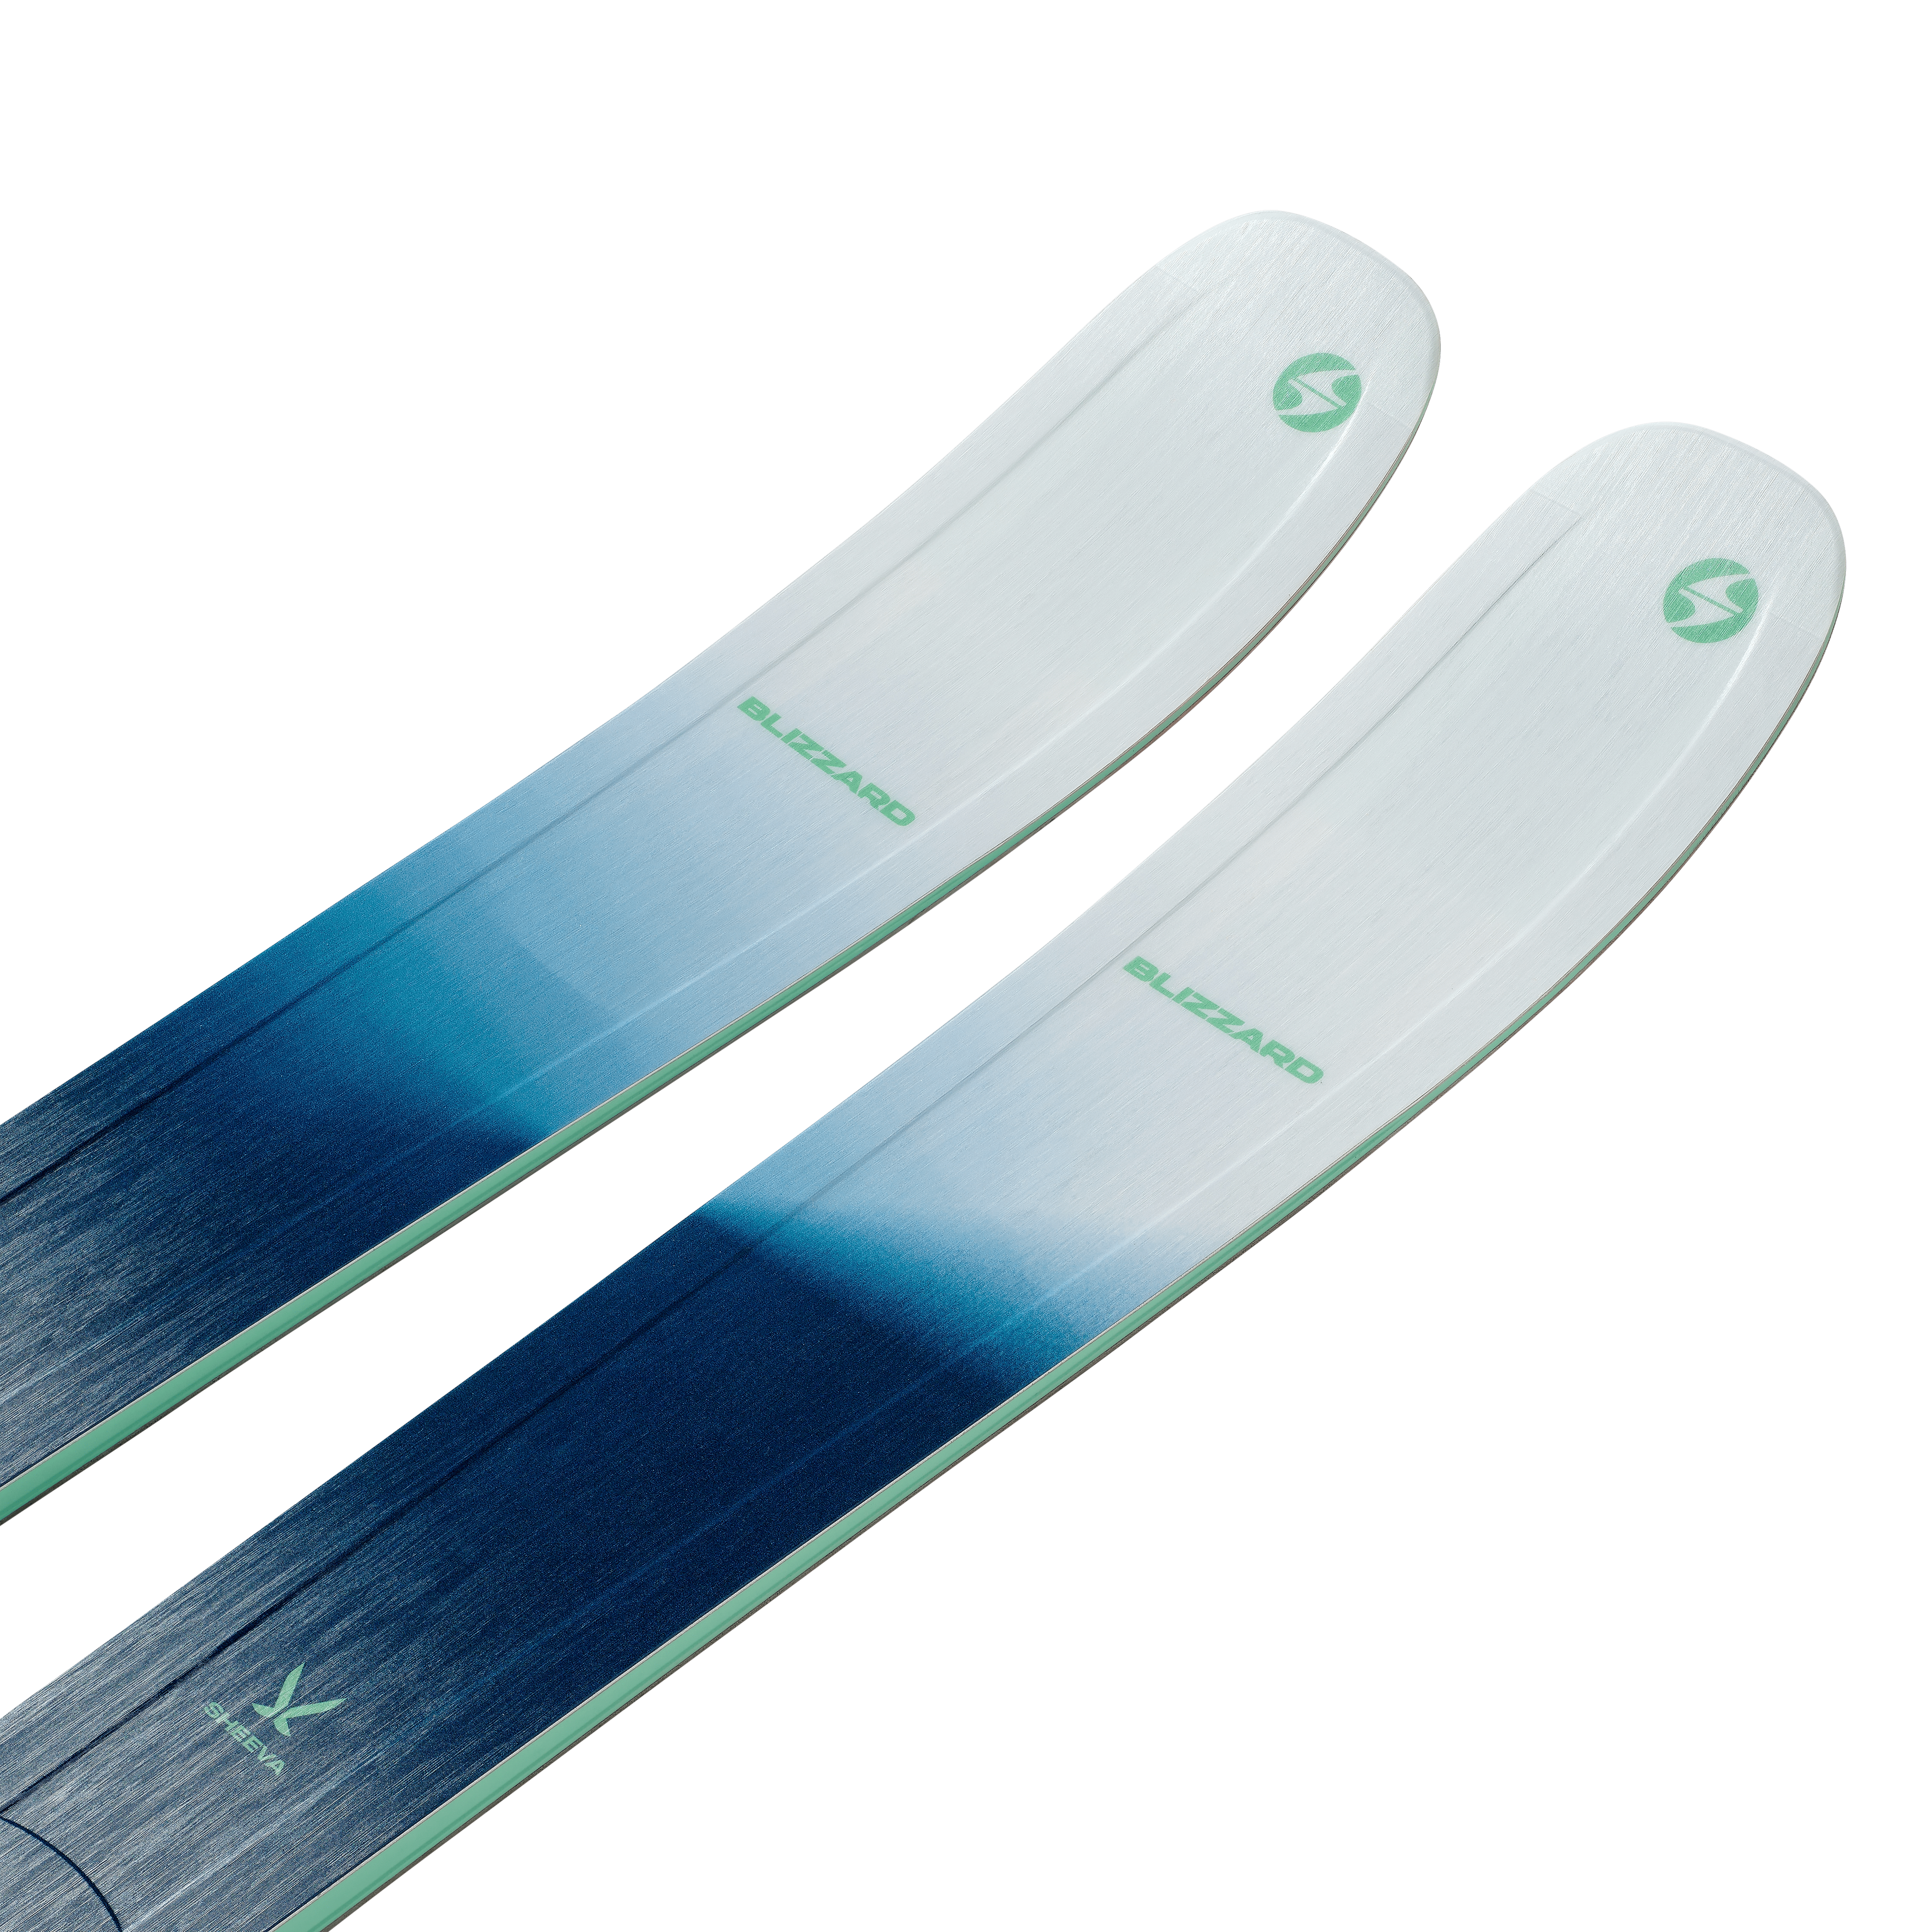 If there is such a thing as a one-ski quiver, you've just found it. The fully redesigned Sheeva 9 is the nimble ninja of the Sheeva family, featuring a Freeride Trueblend woodcore and all-new FluxForm W.S.D. technology, which, combined, pack the perfect blend of power and playfulness into an ever-versatile, 96mm-waisted freeride weapon. 